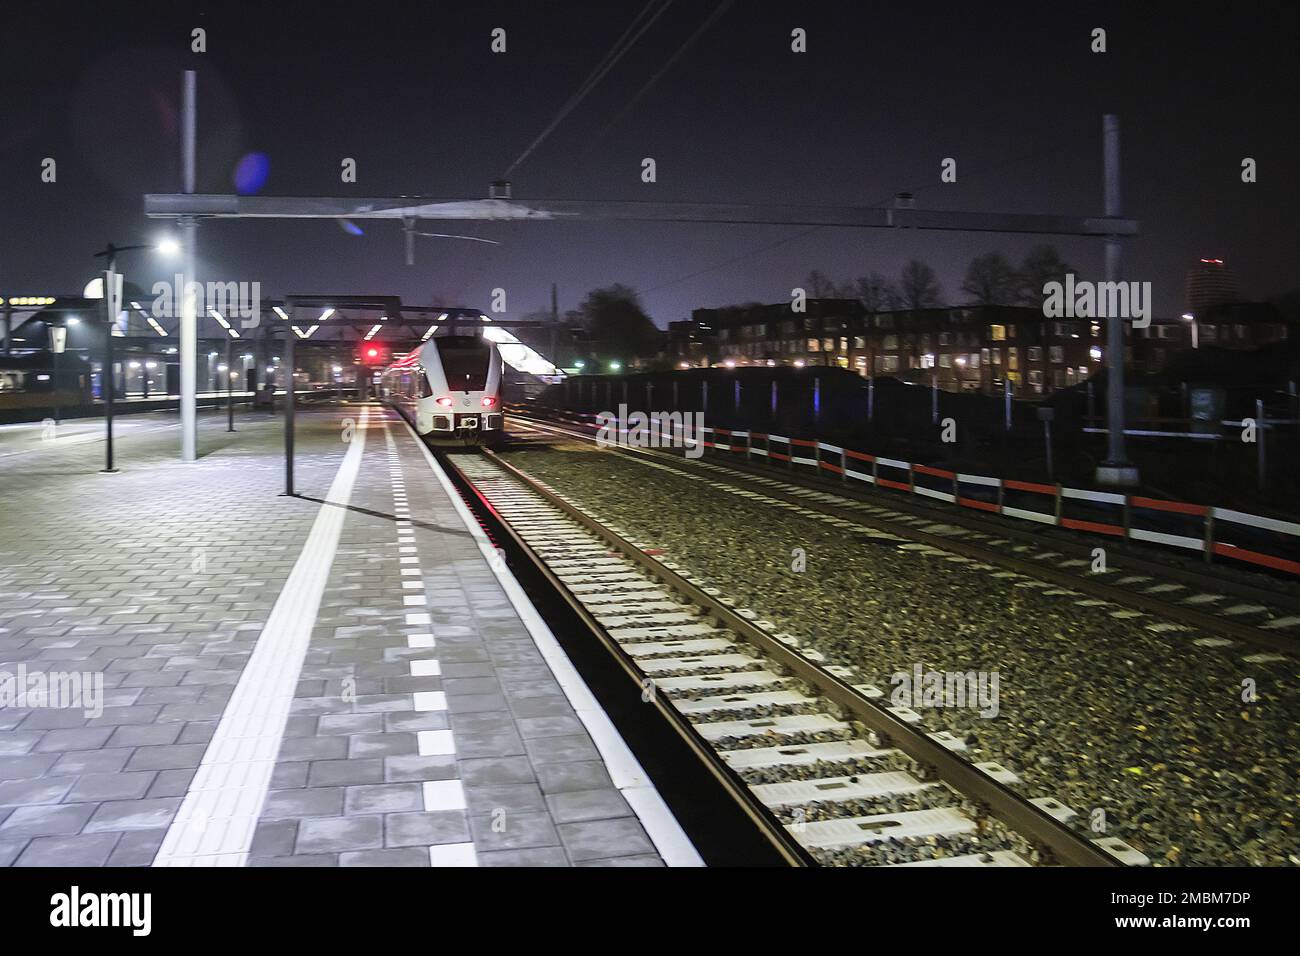 GRONINGEN - The first night train Arriva night train at Groningen station.  The night train will run from Groningen to Schiphol and back every Friday  night. Photo: the train leaves exactly at